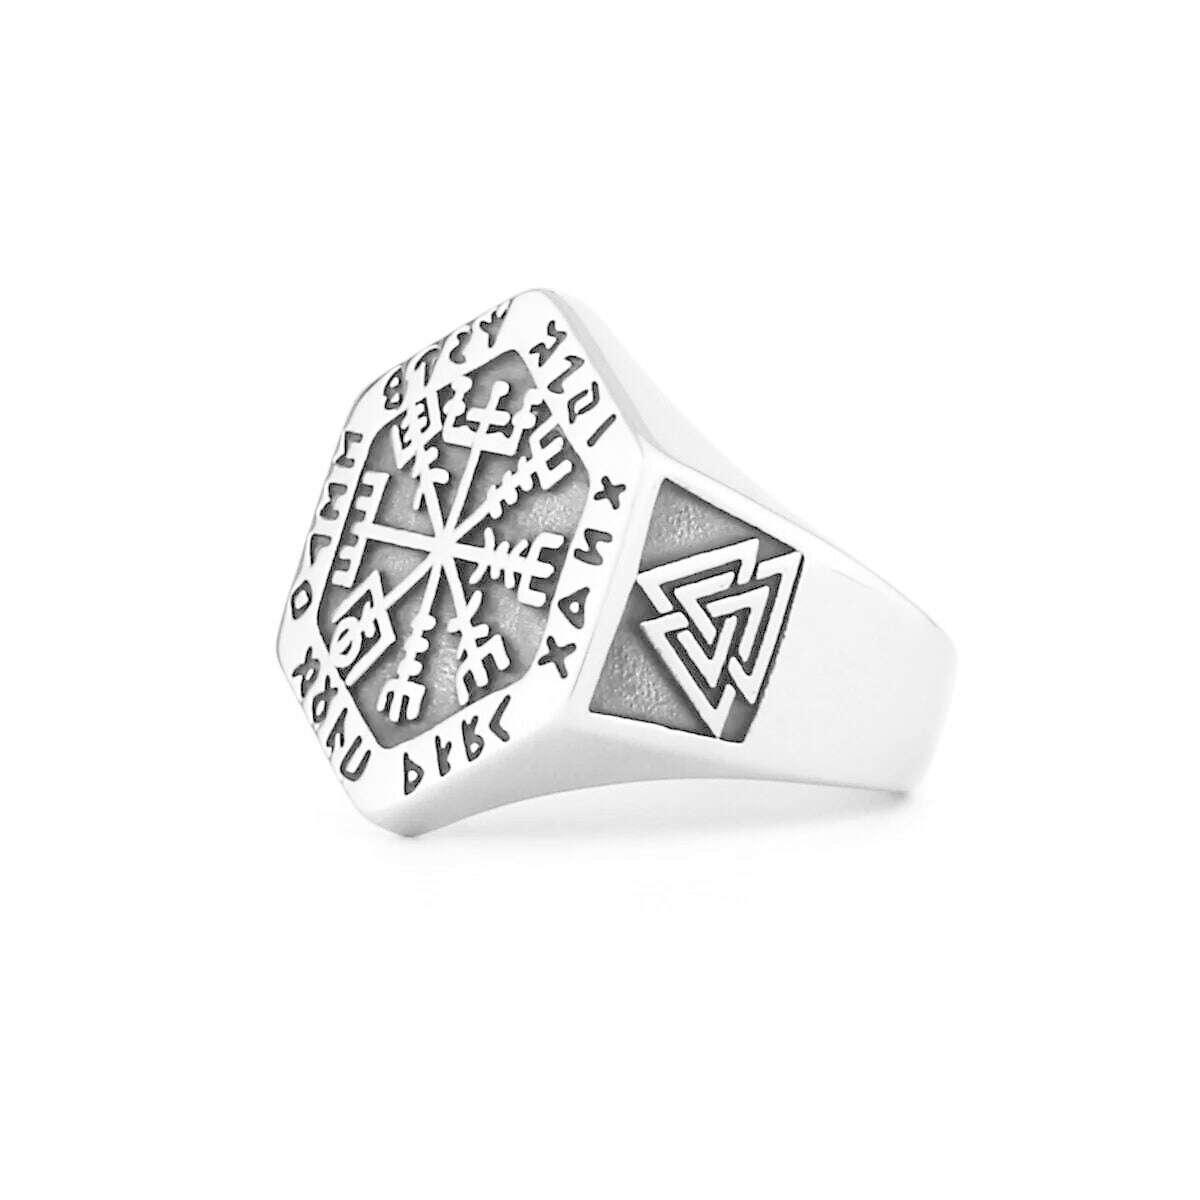 KIMLUD, Nordic Celtics Knotwork Viking Tree of Life Yggdrasil Ring For Men Vintage Stainless Steel Viking Ring Amulet Jewelry Gift, 7 / Chocolate Color / China, KIMLUD Women's Clothes